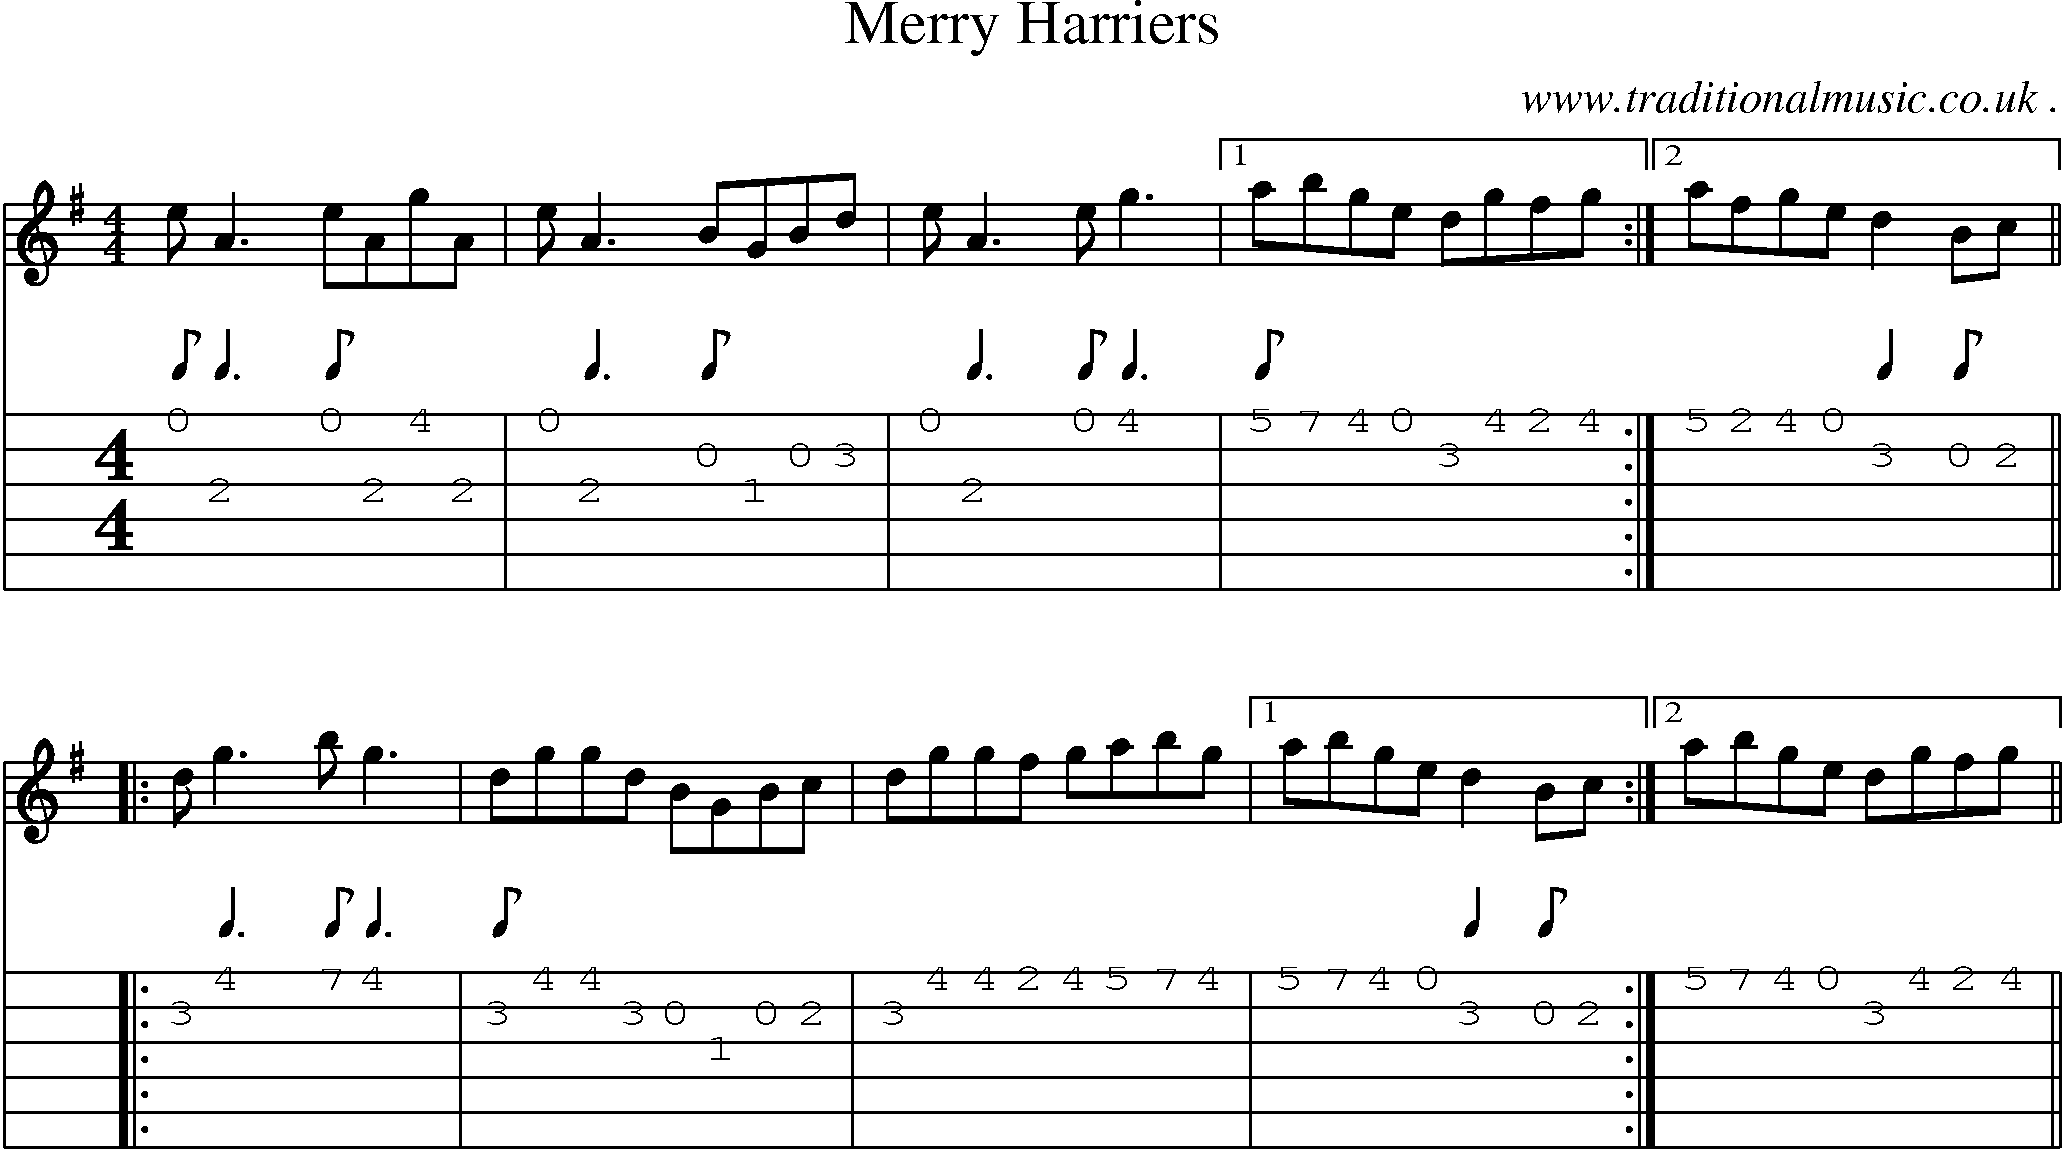 Sheet-Music and Guitar Tabs for Merry Harriers